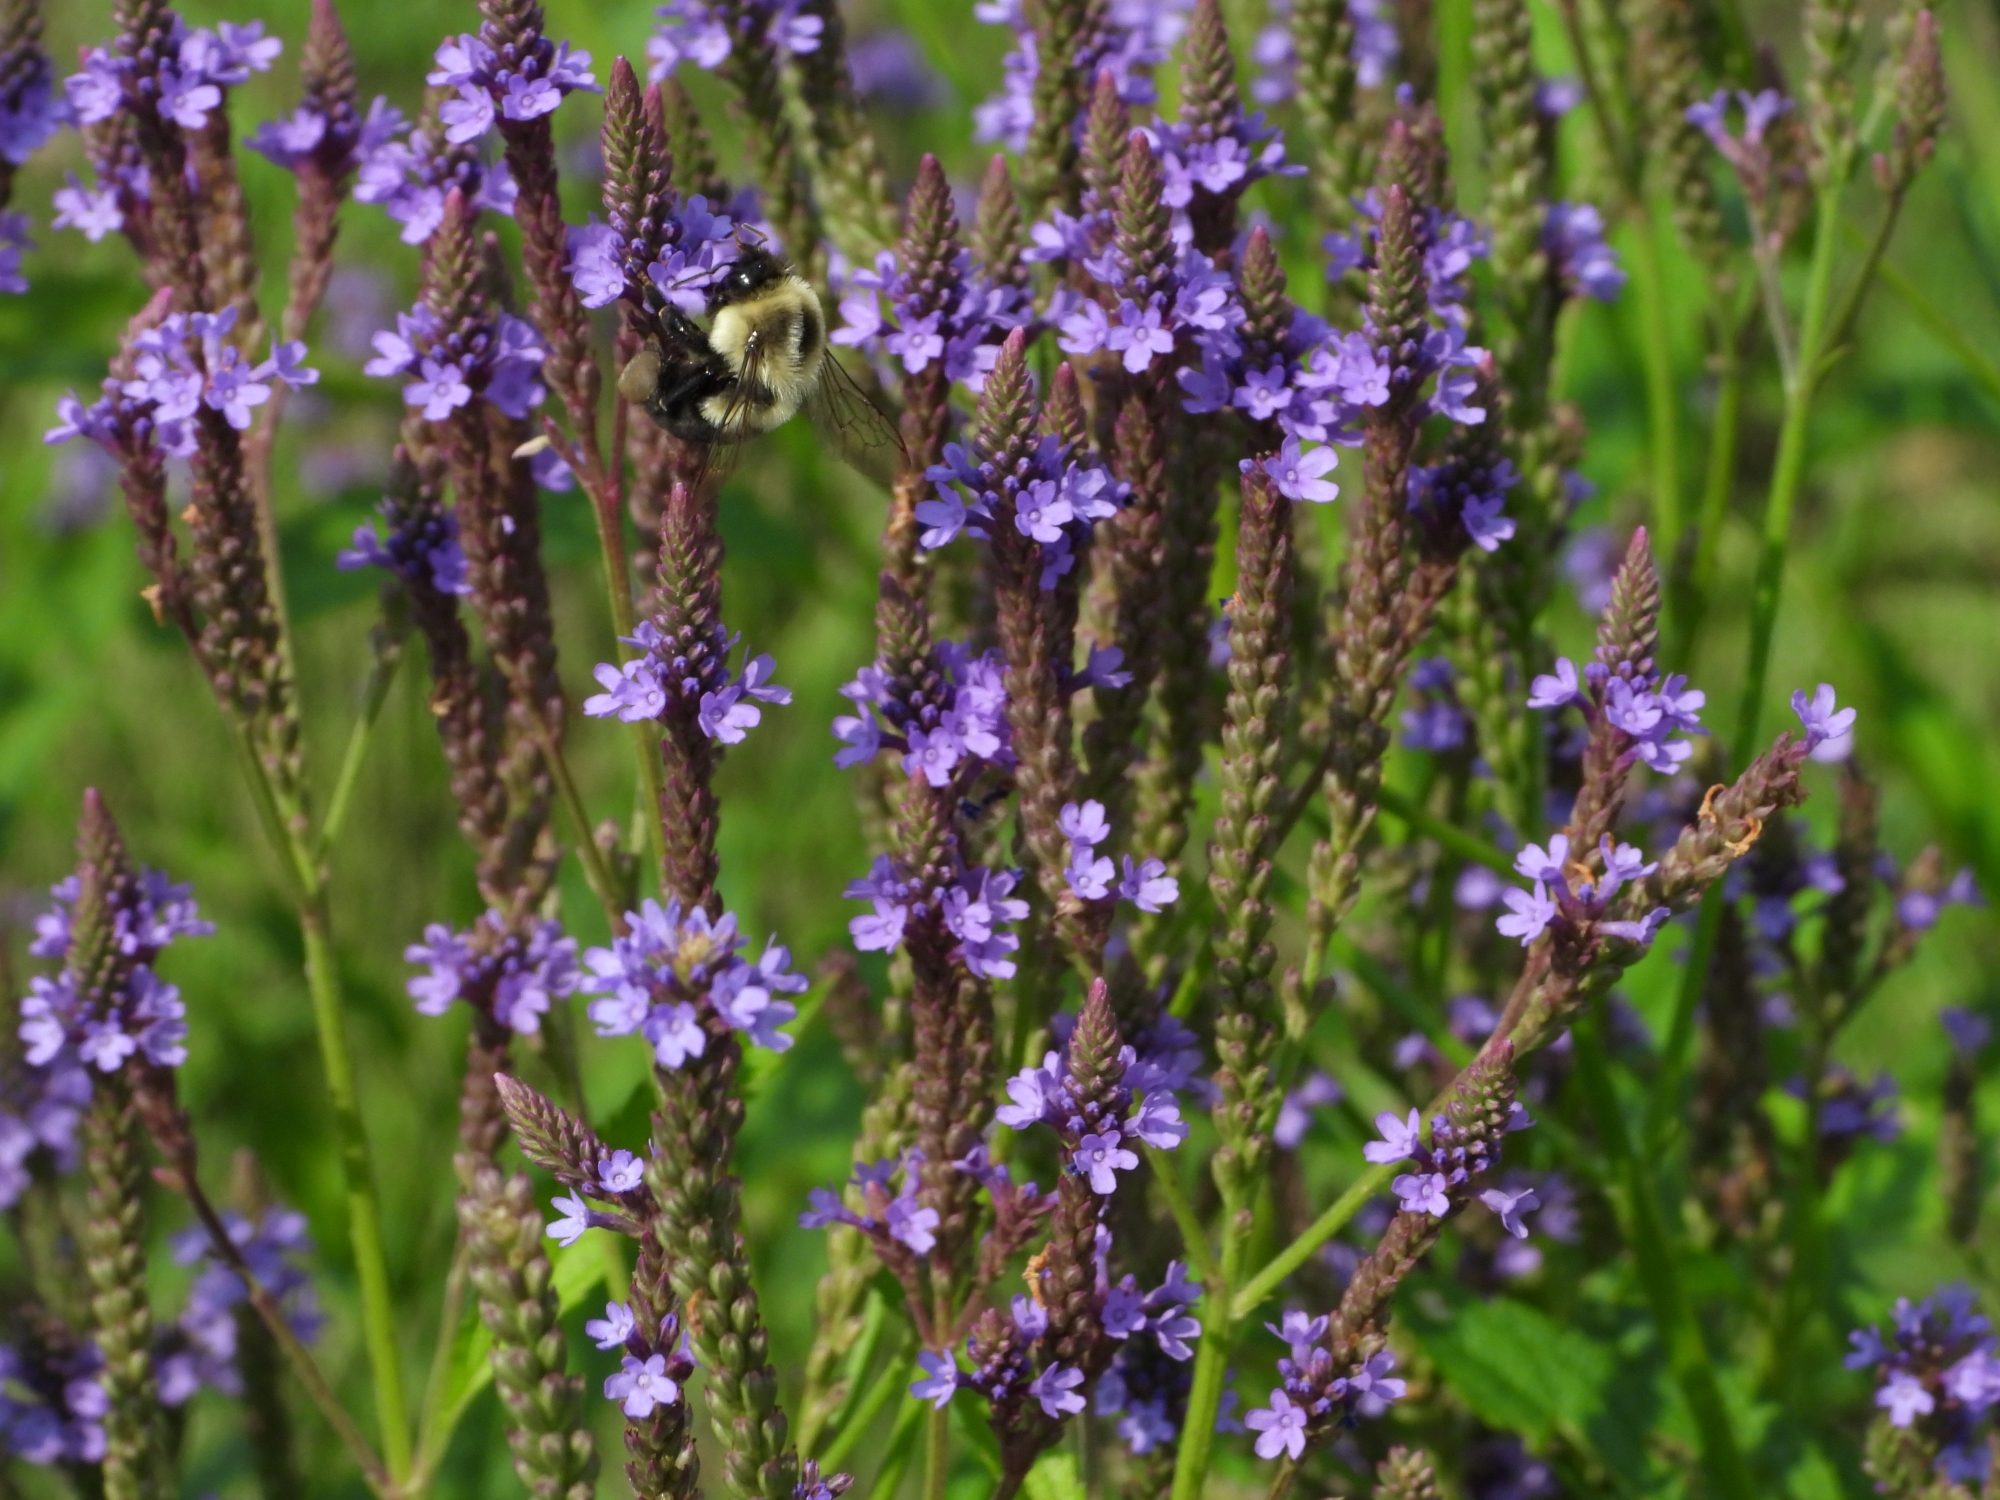 Link, a bumble bee visits purple flowers of swamp verbena